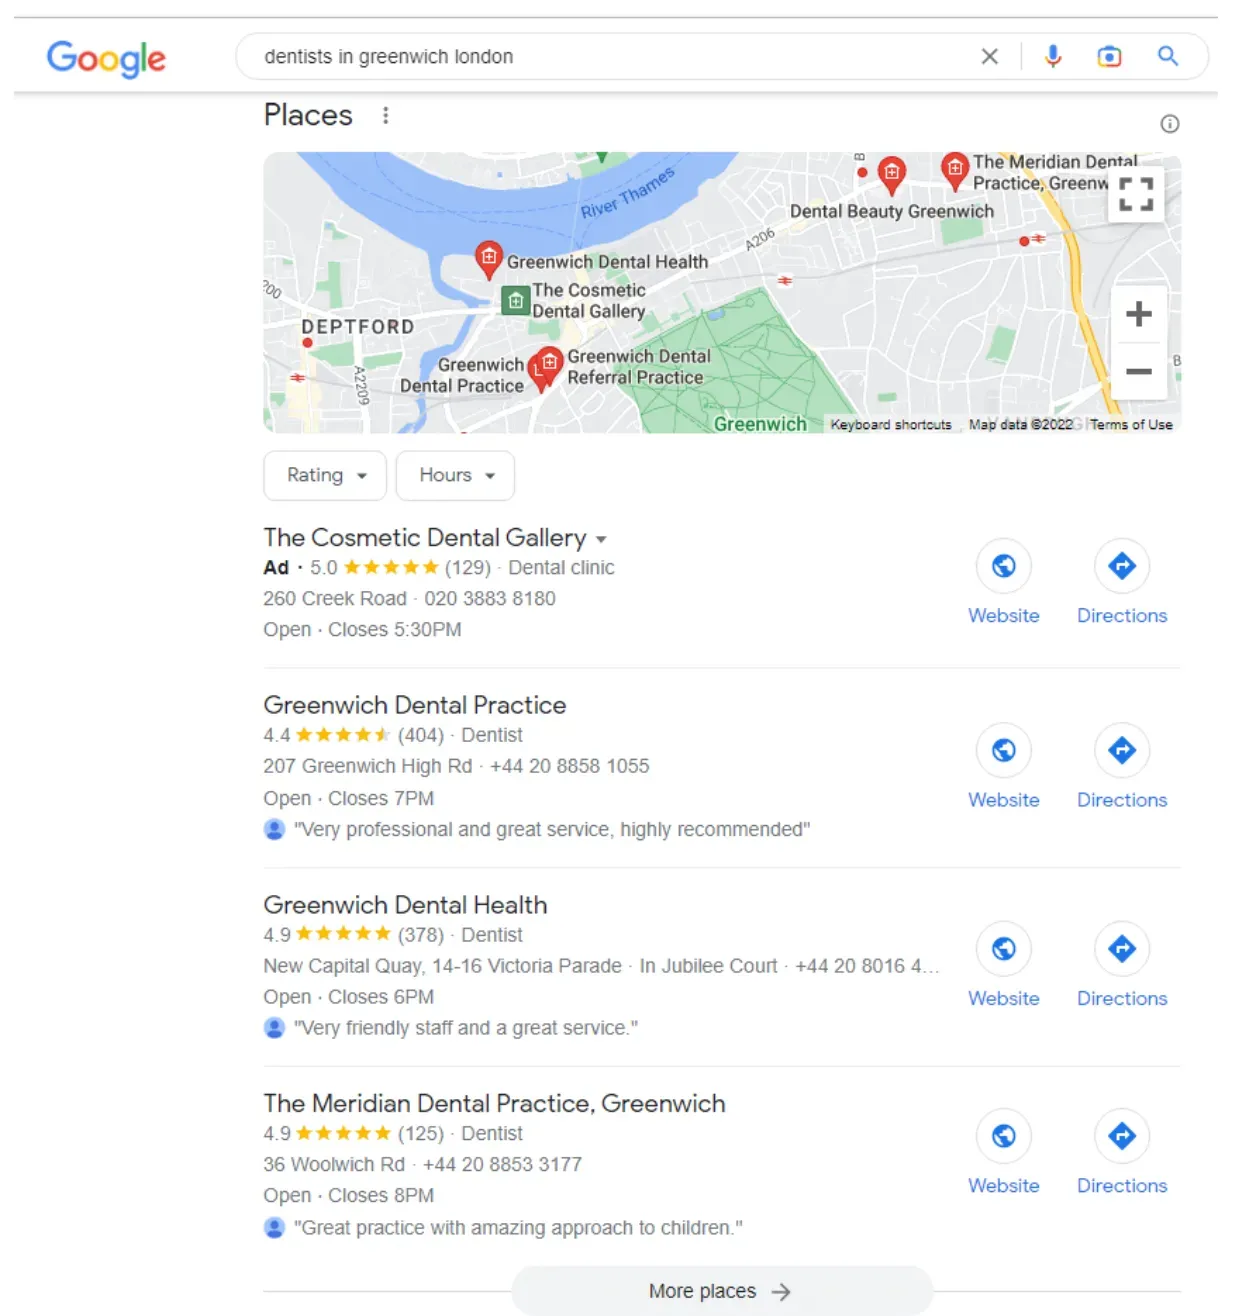 Results of a local search for dentists in Google’s Local Pack